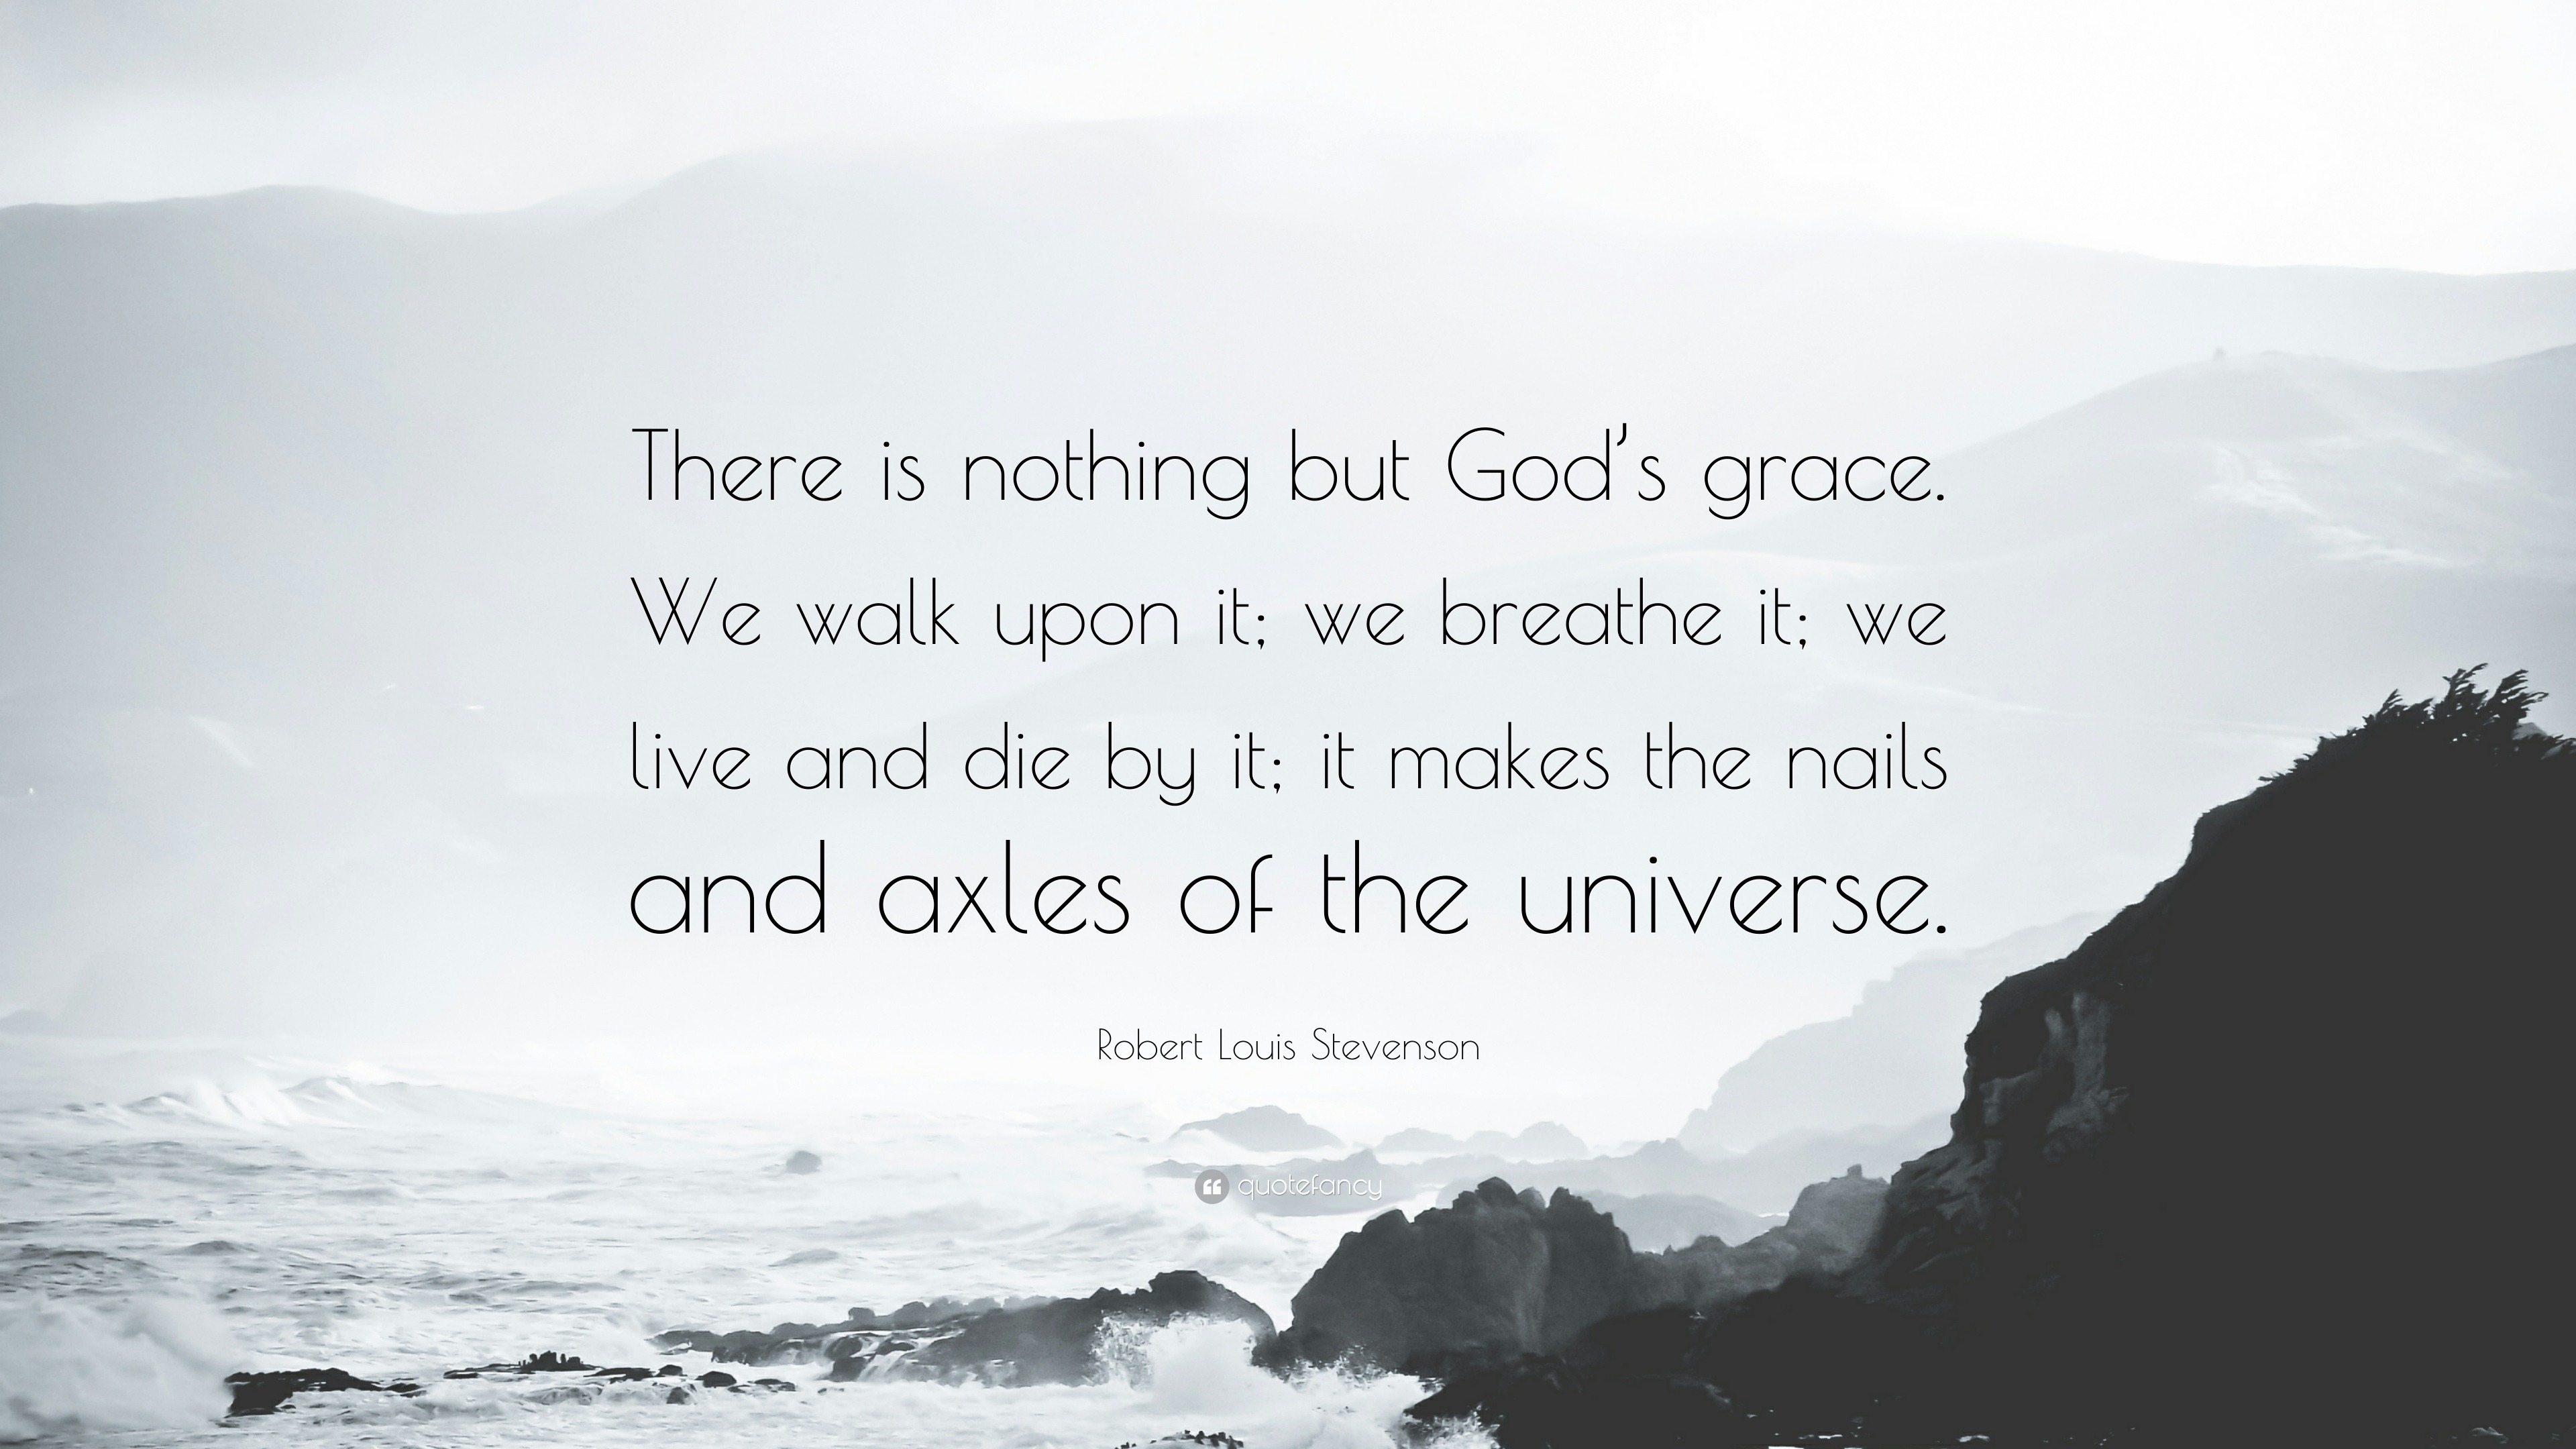 Robert Louis Stevenson Quote There Is Nothing But God S Grace We Walk Upon It We Breathe It We Live And Die By It It Makes The Nails And Axles Of